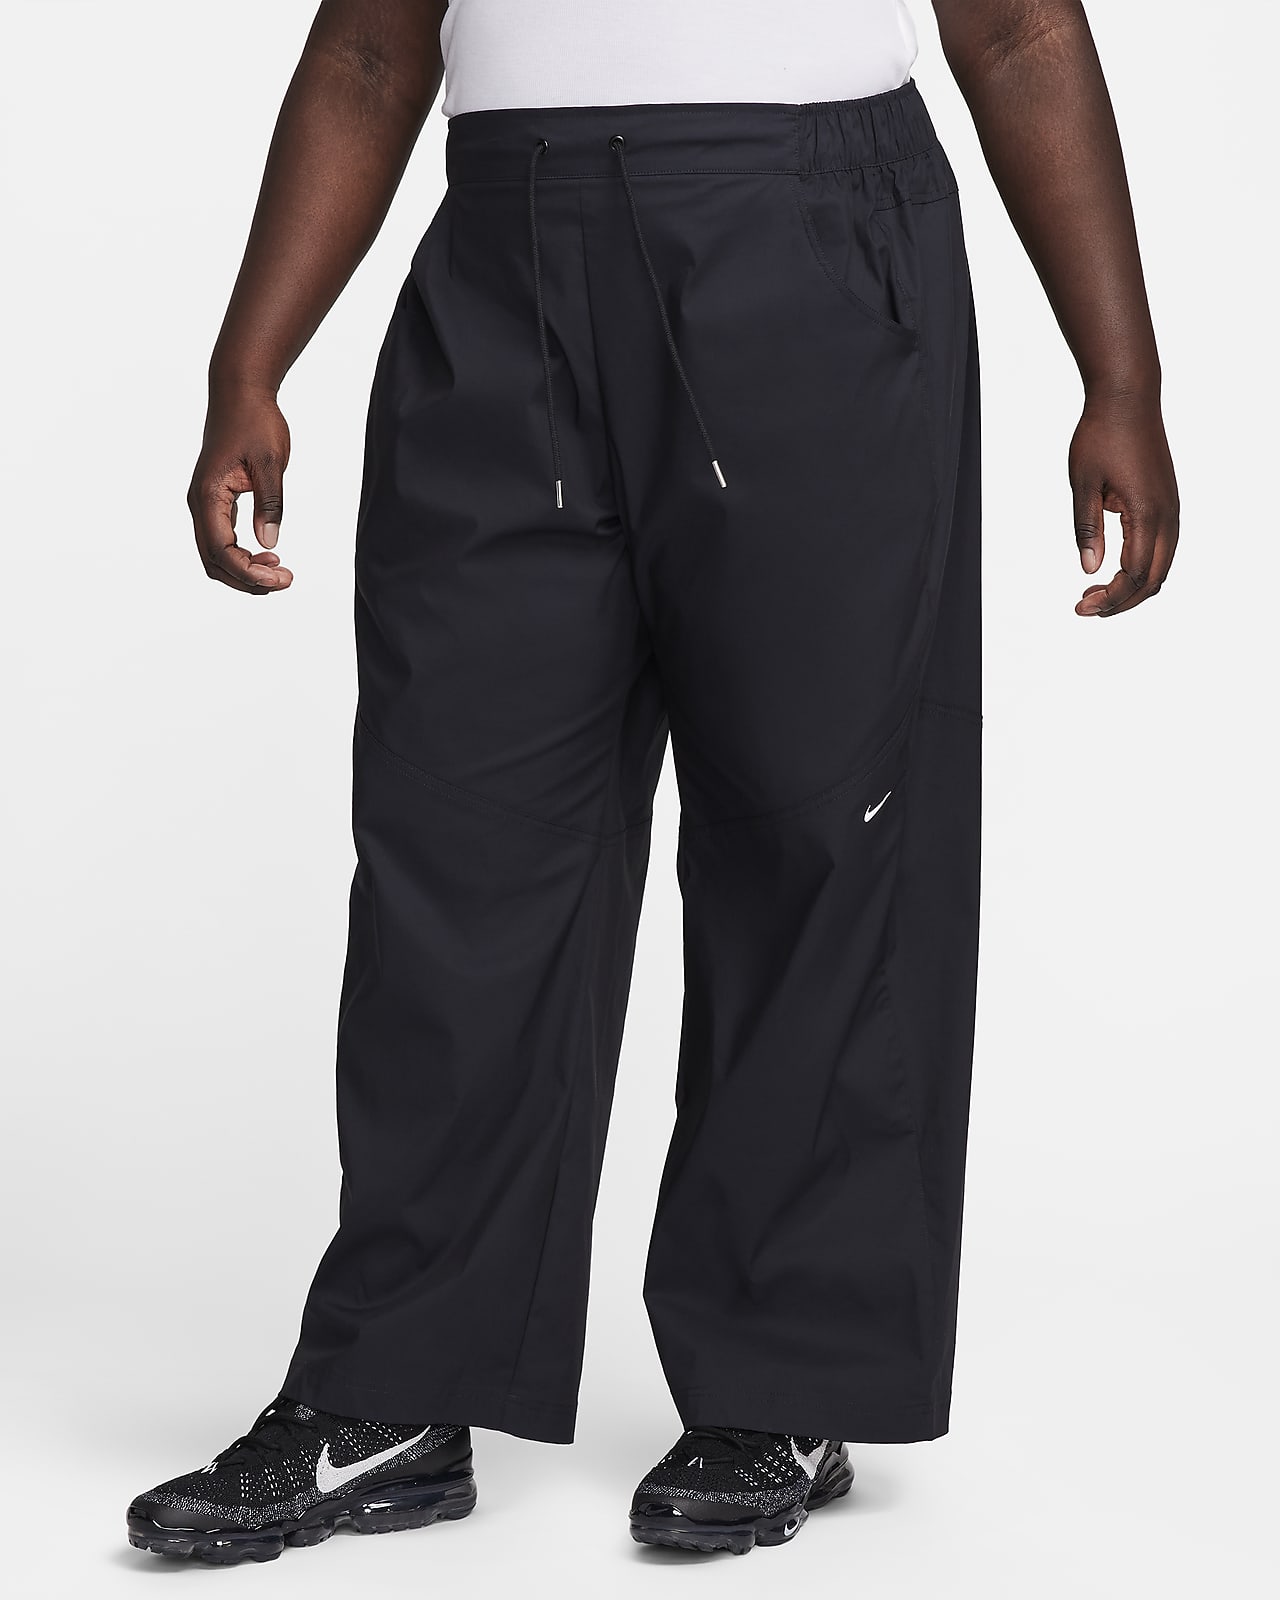 https://static.nike.com/a/images/t_PDP_1280_v1/f_auto,q_auto:eco/f5d3782d-f20c-4073-b731-8964b2f44a32/sportswear-essential-woven-high-waisted-trousers-3kTkb8.png